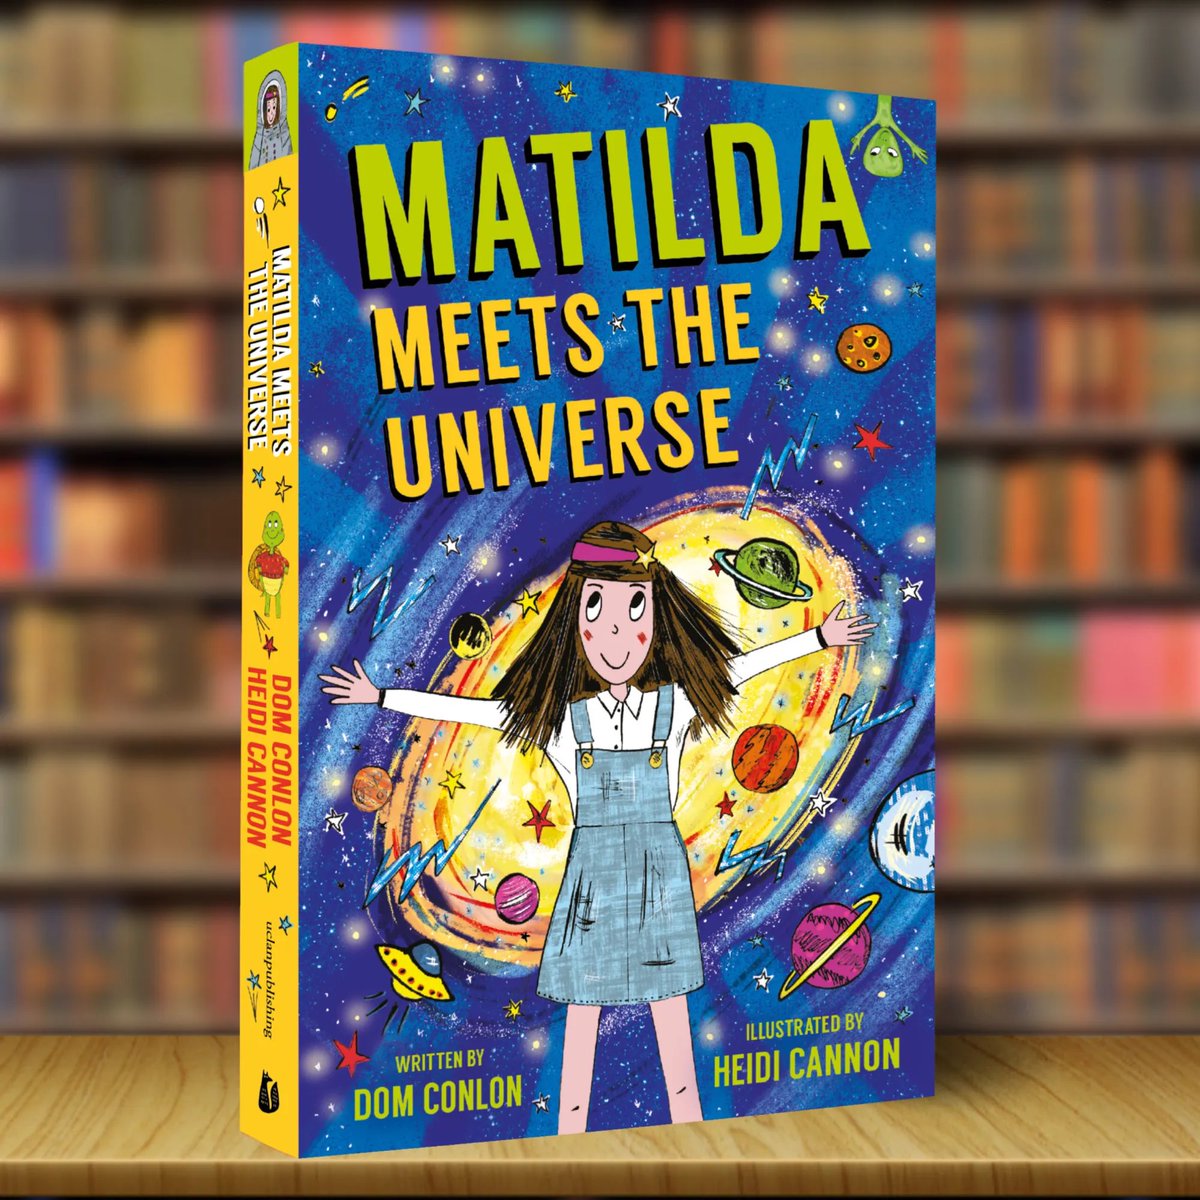 In June, the second Meet Matilda book launches. She will ask the biggest questions about planets, stars, and distances, speeds and communication as she seeks to become the first person to talk to aliens… but will talking be possible? Energetically illustrated by Heidi Cannon